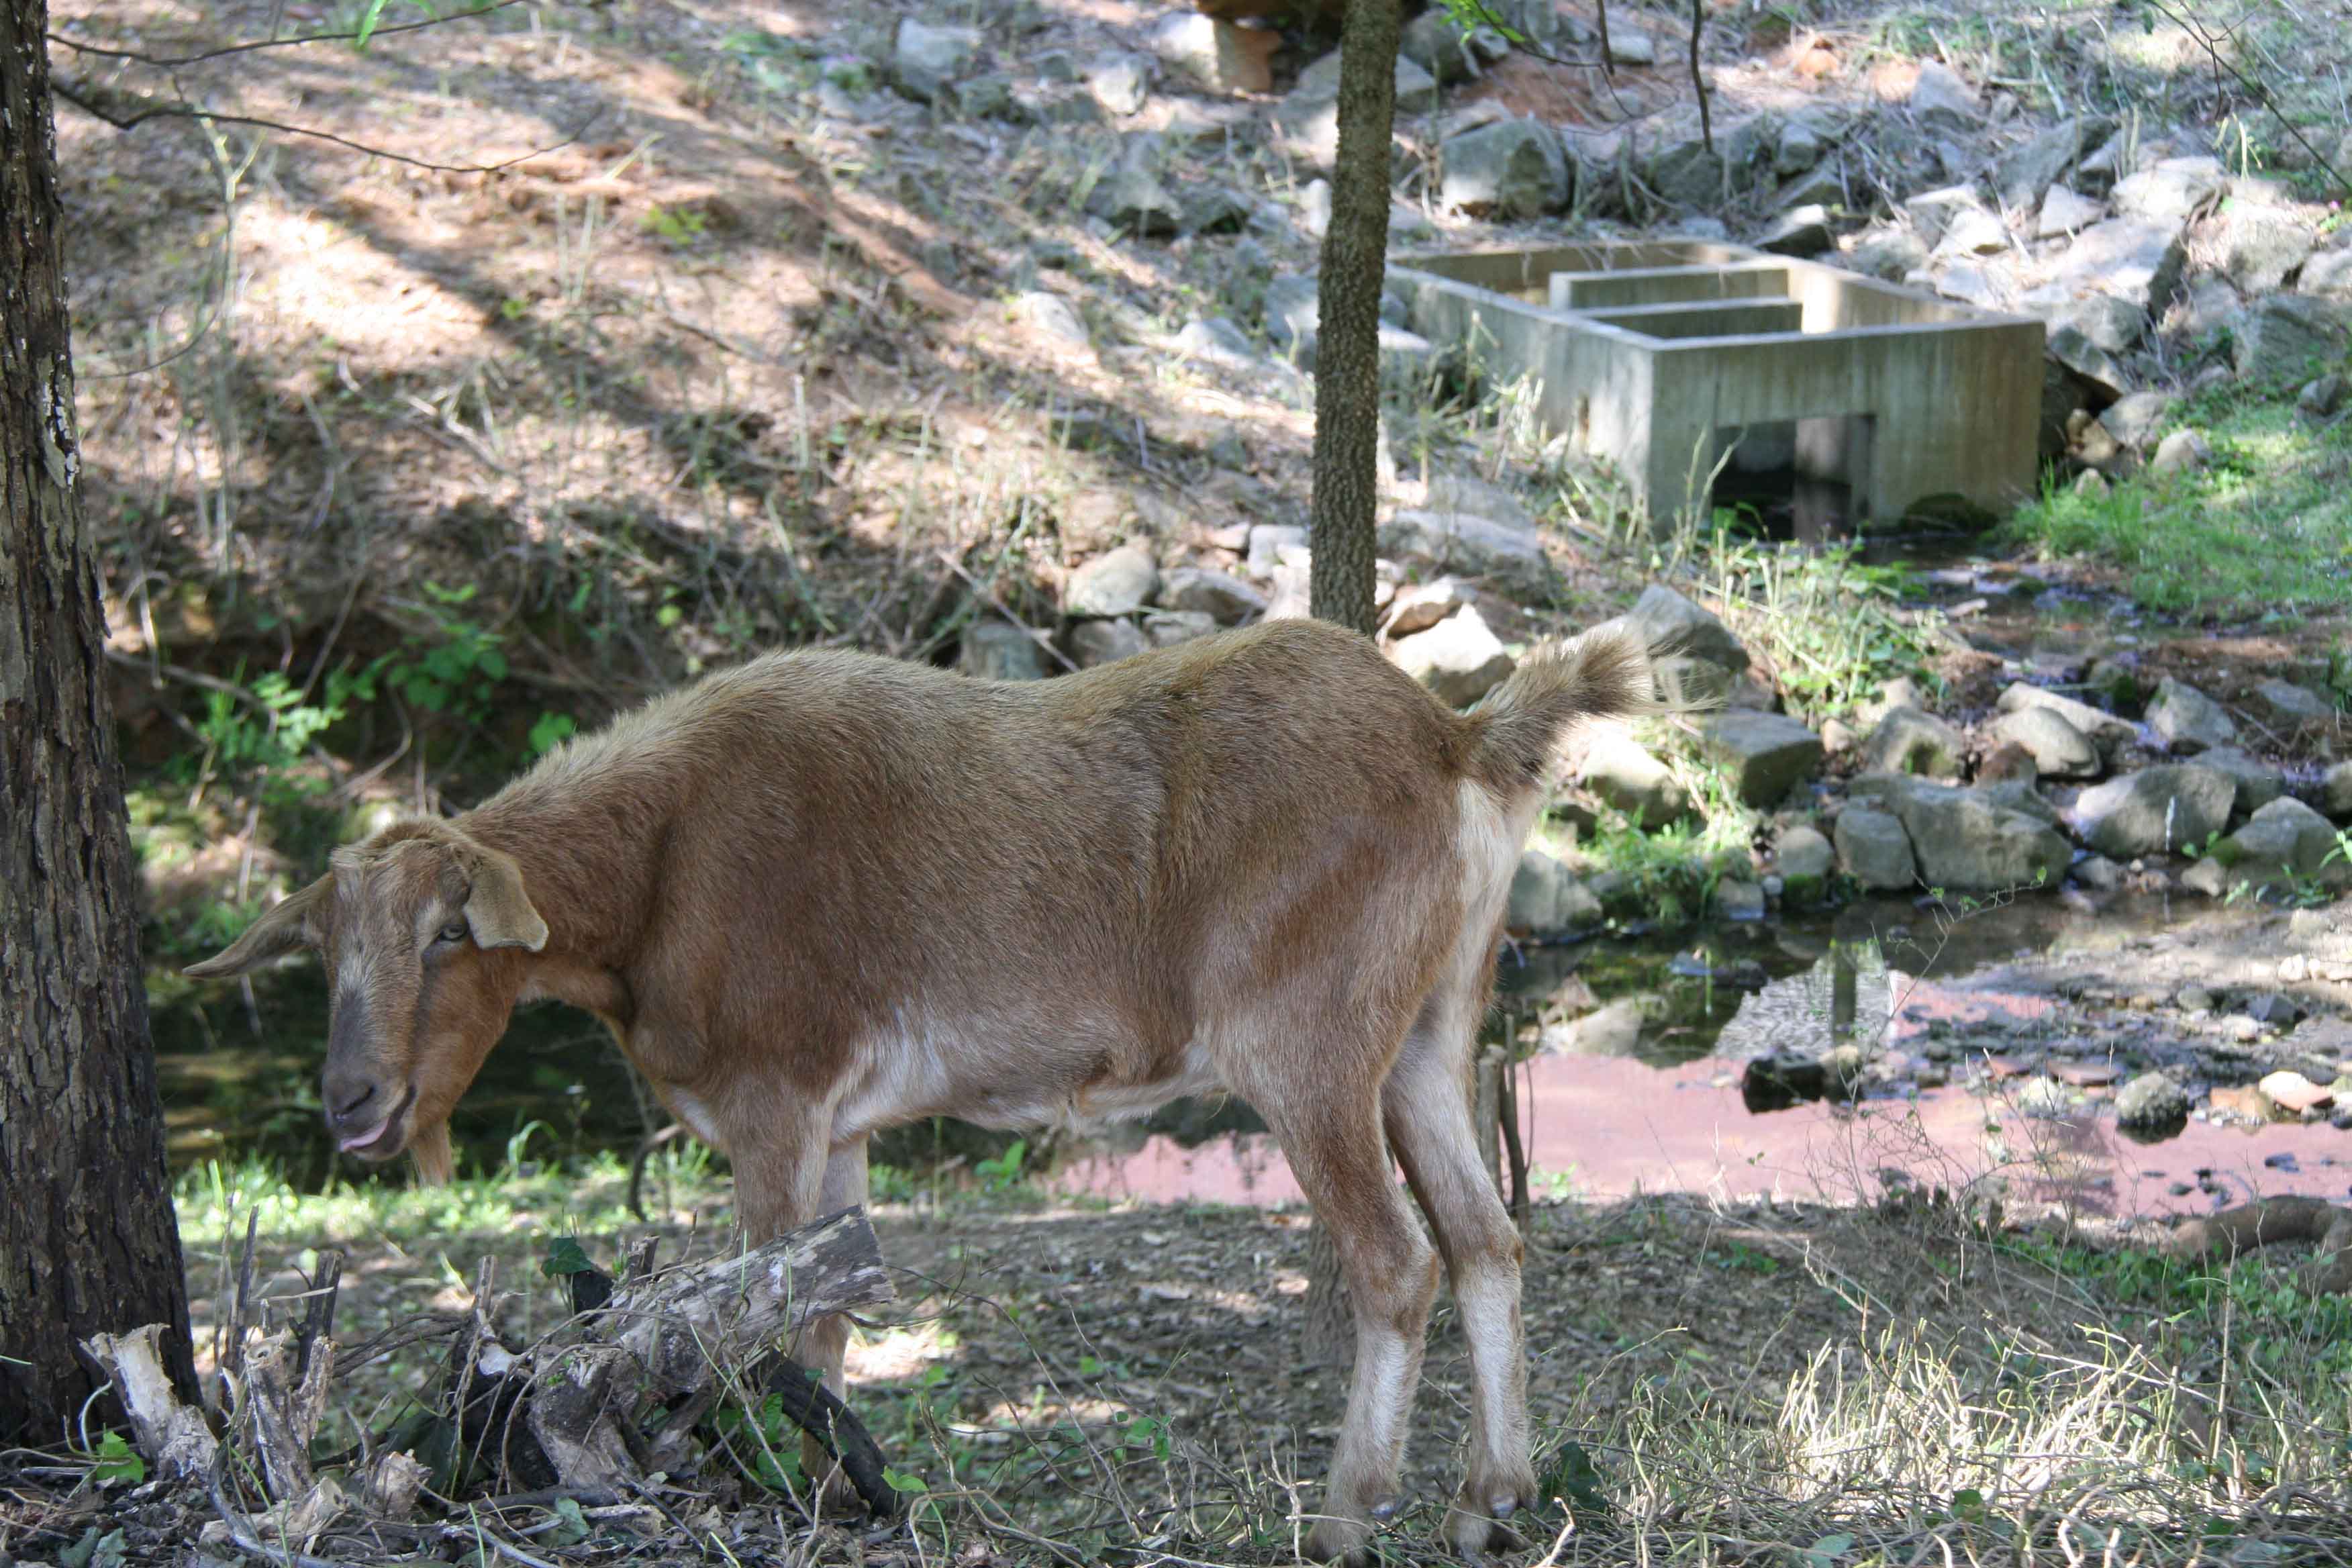 Photos of goats cleaning up the banks of Tanyard Creek near Baxter Street in Athens. Students from the UGA College of Environment and Design installed the goats as part of service-learning project.